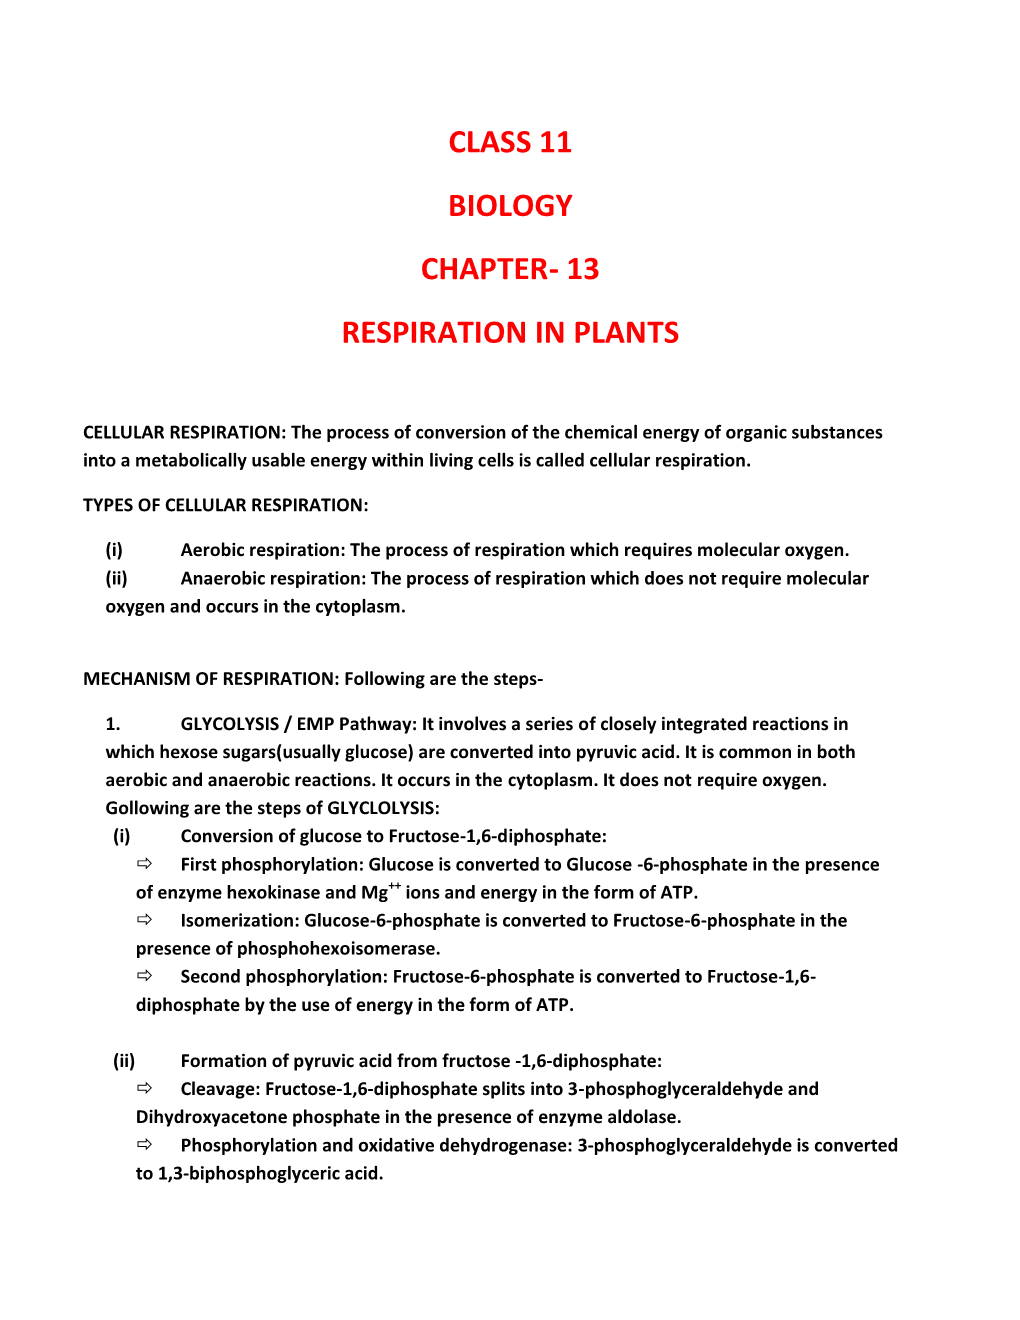 Class 11 Biology Chapter- 13 Respiration in Plants